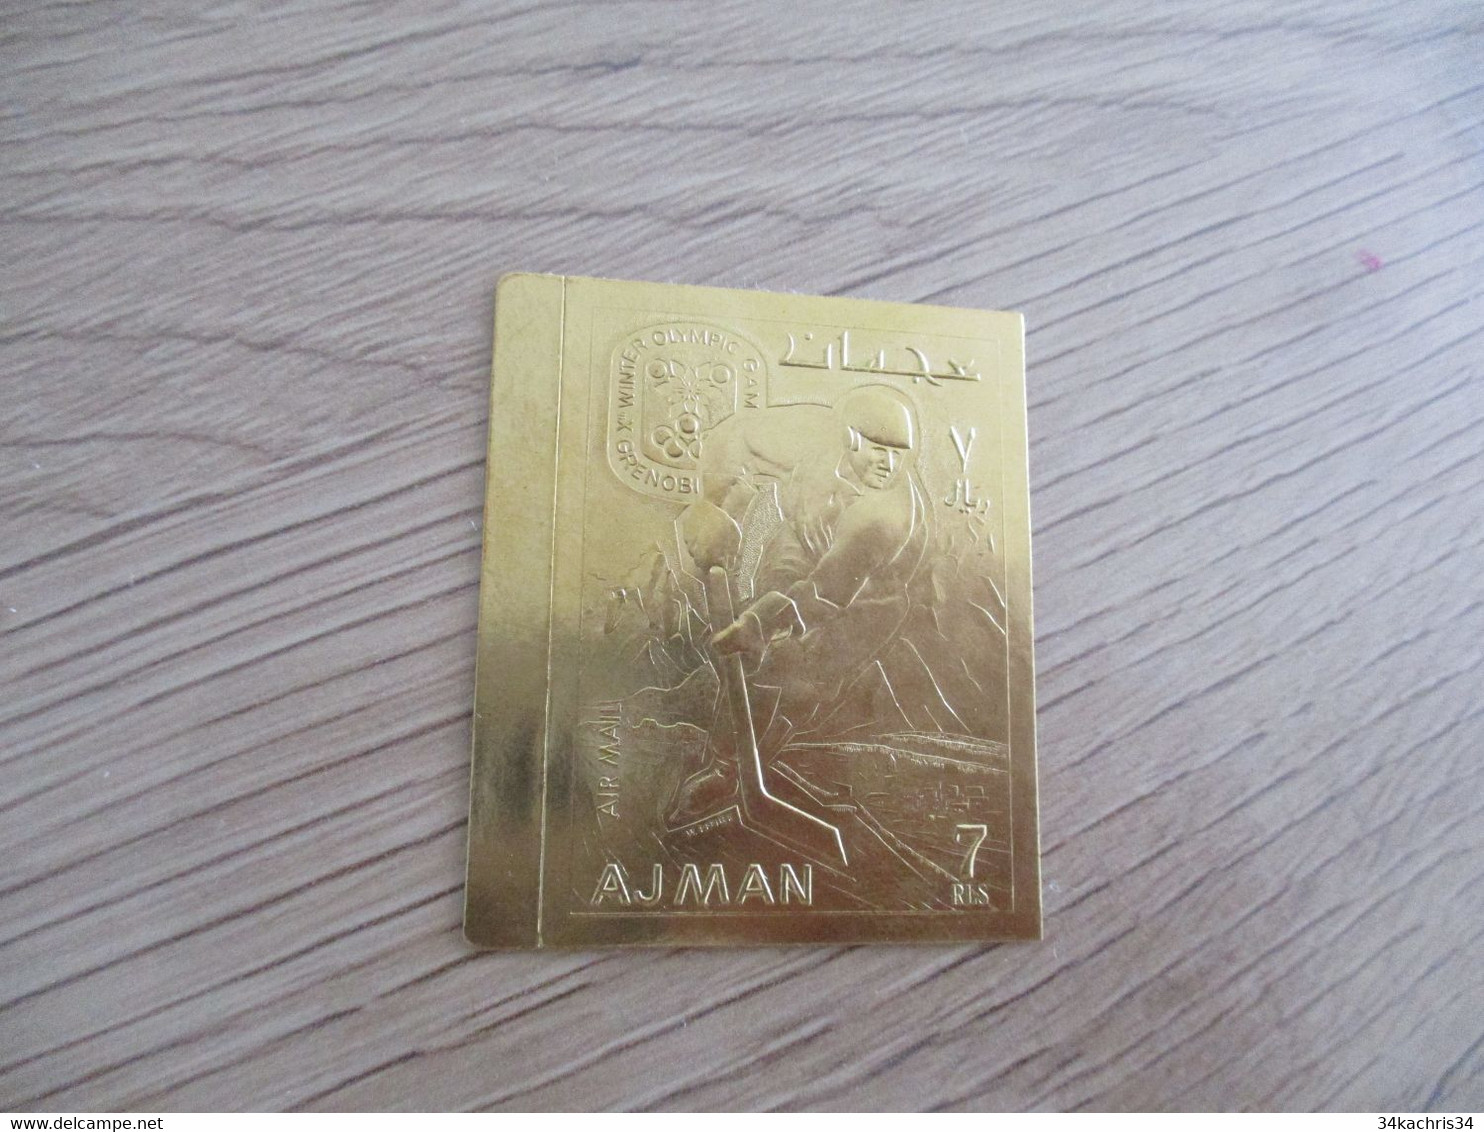 Ajman Stamp Unperfored  Sans Charnière Or Gold PEGGY FLEMMING  Gold Medal Of 1968 Winter Olympic Games - Adschman